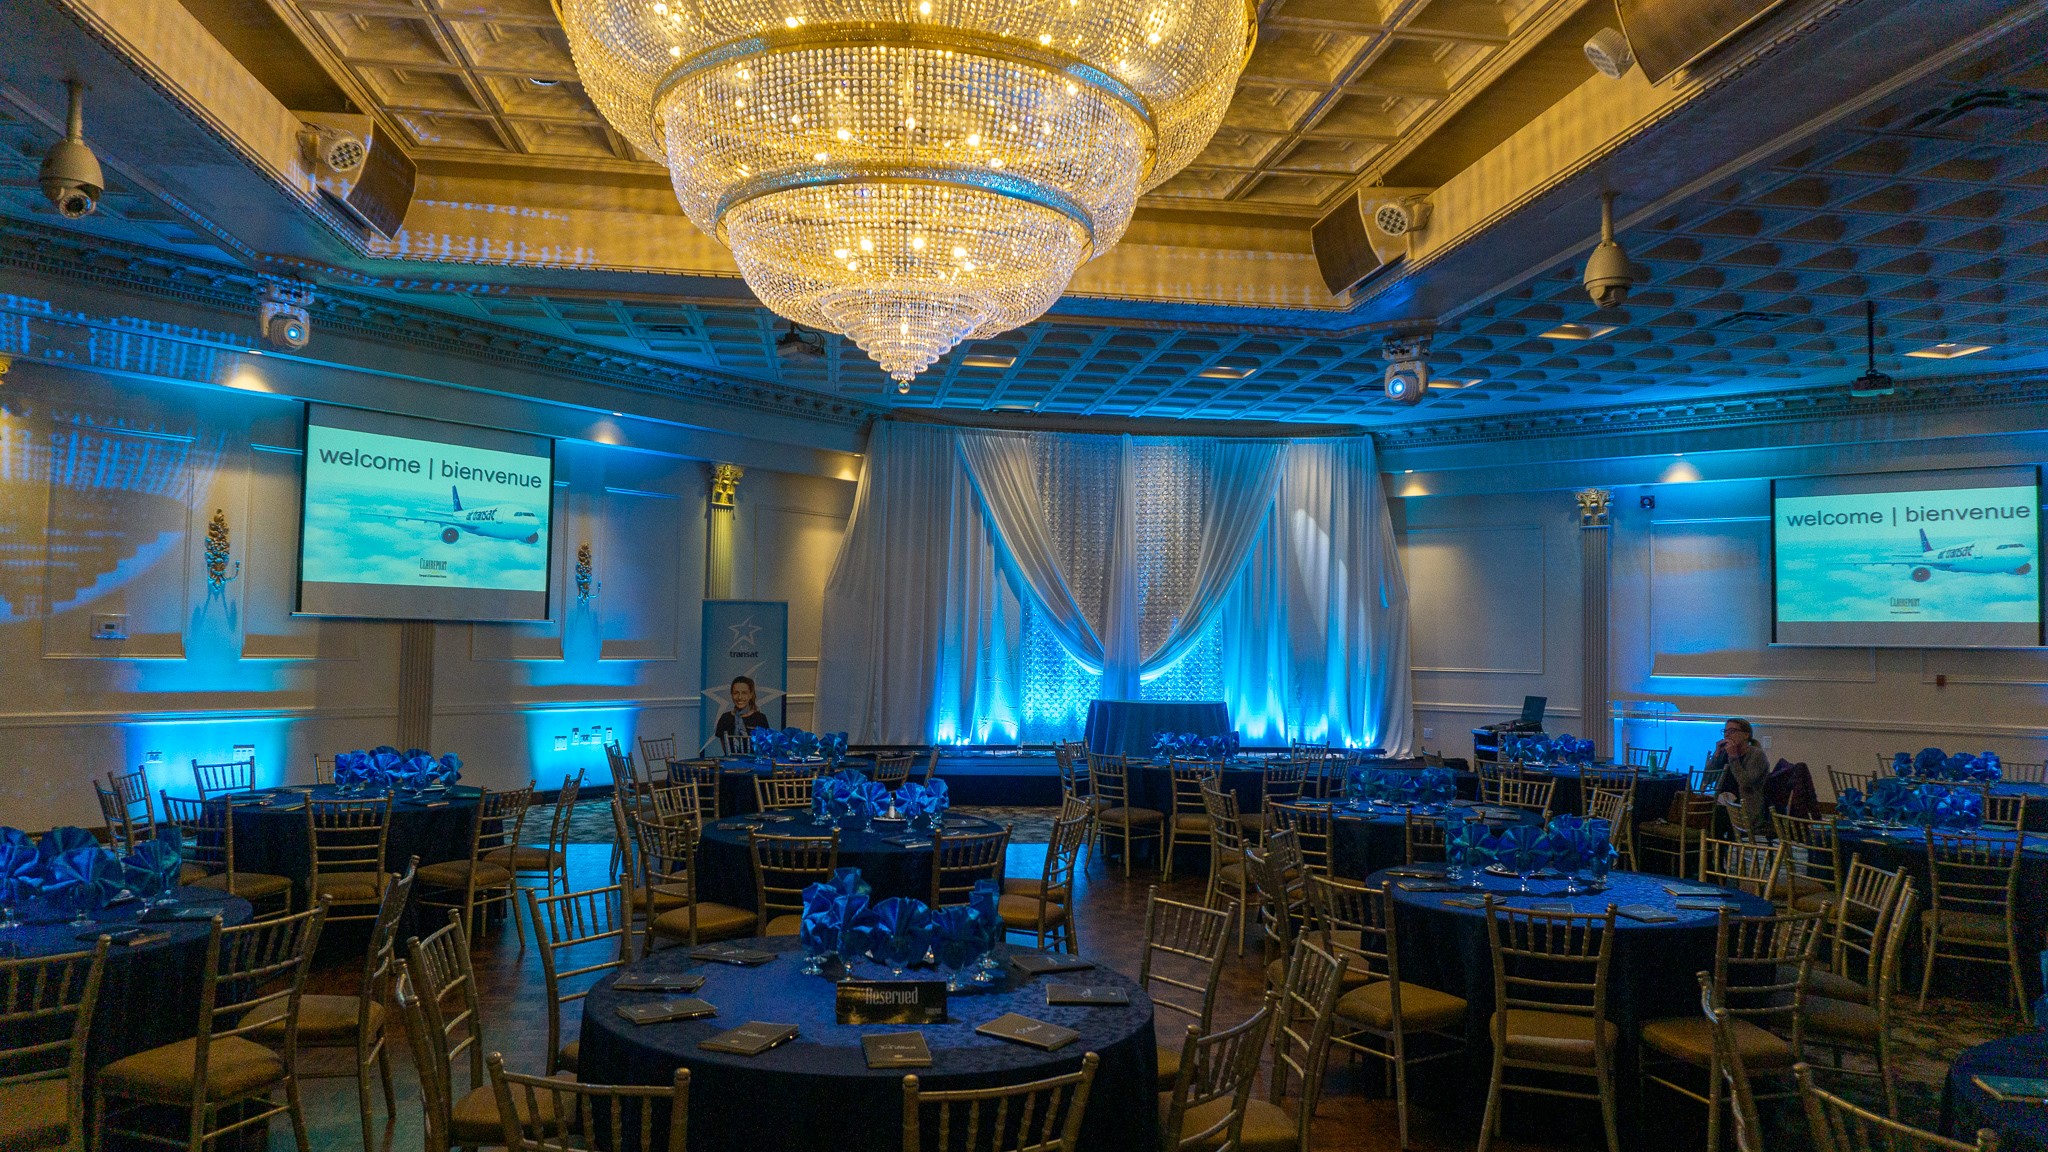 Three Key Features To Look For In A Banquet Hall While Planning For A Corporate Event